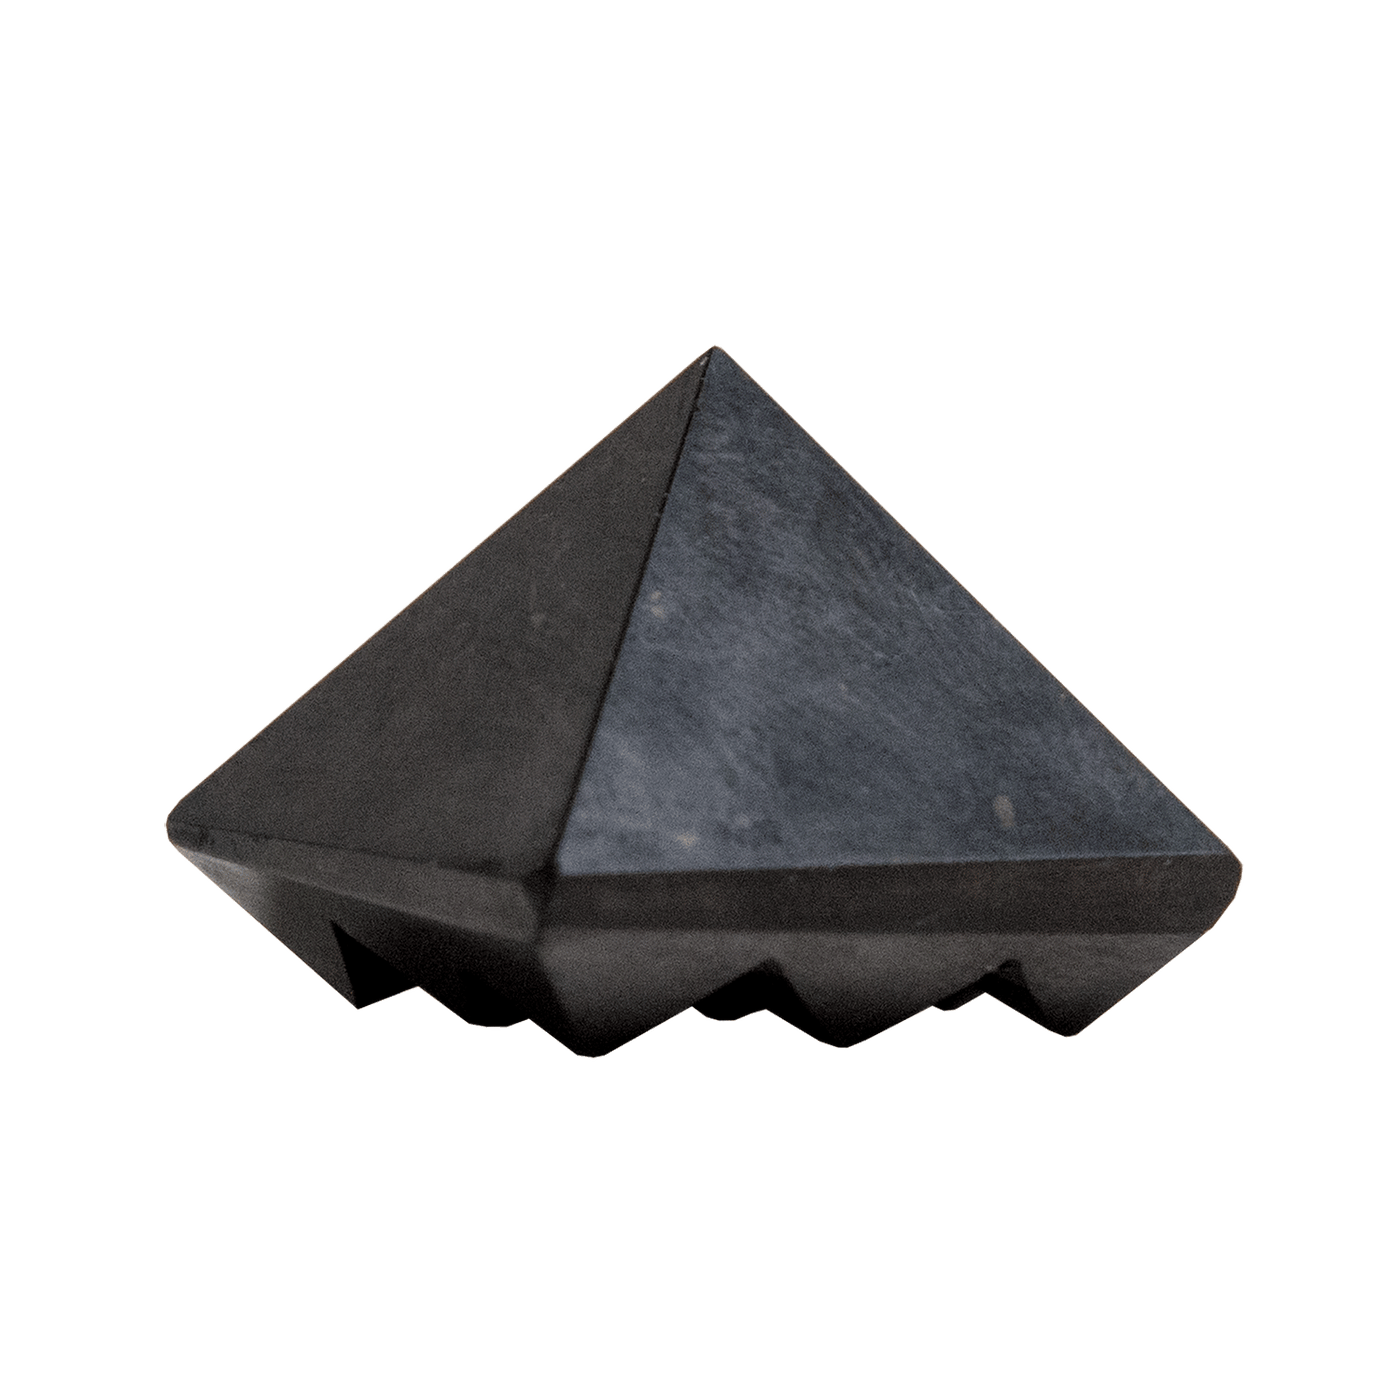 straight-on view of genuine Shungite pyramid with unique 9-pyramid carving on the base by Energy Muse